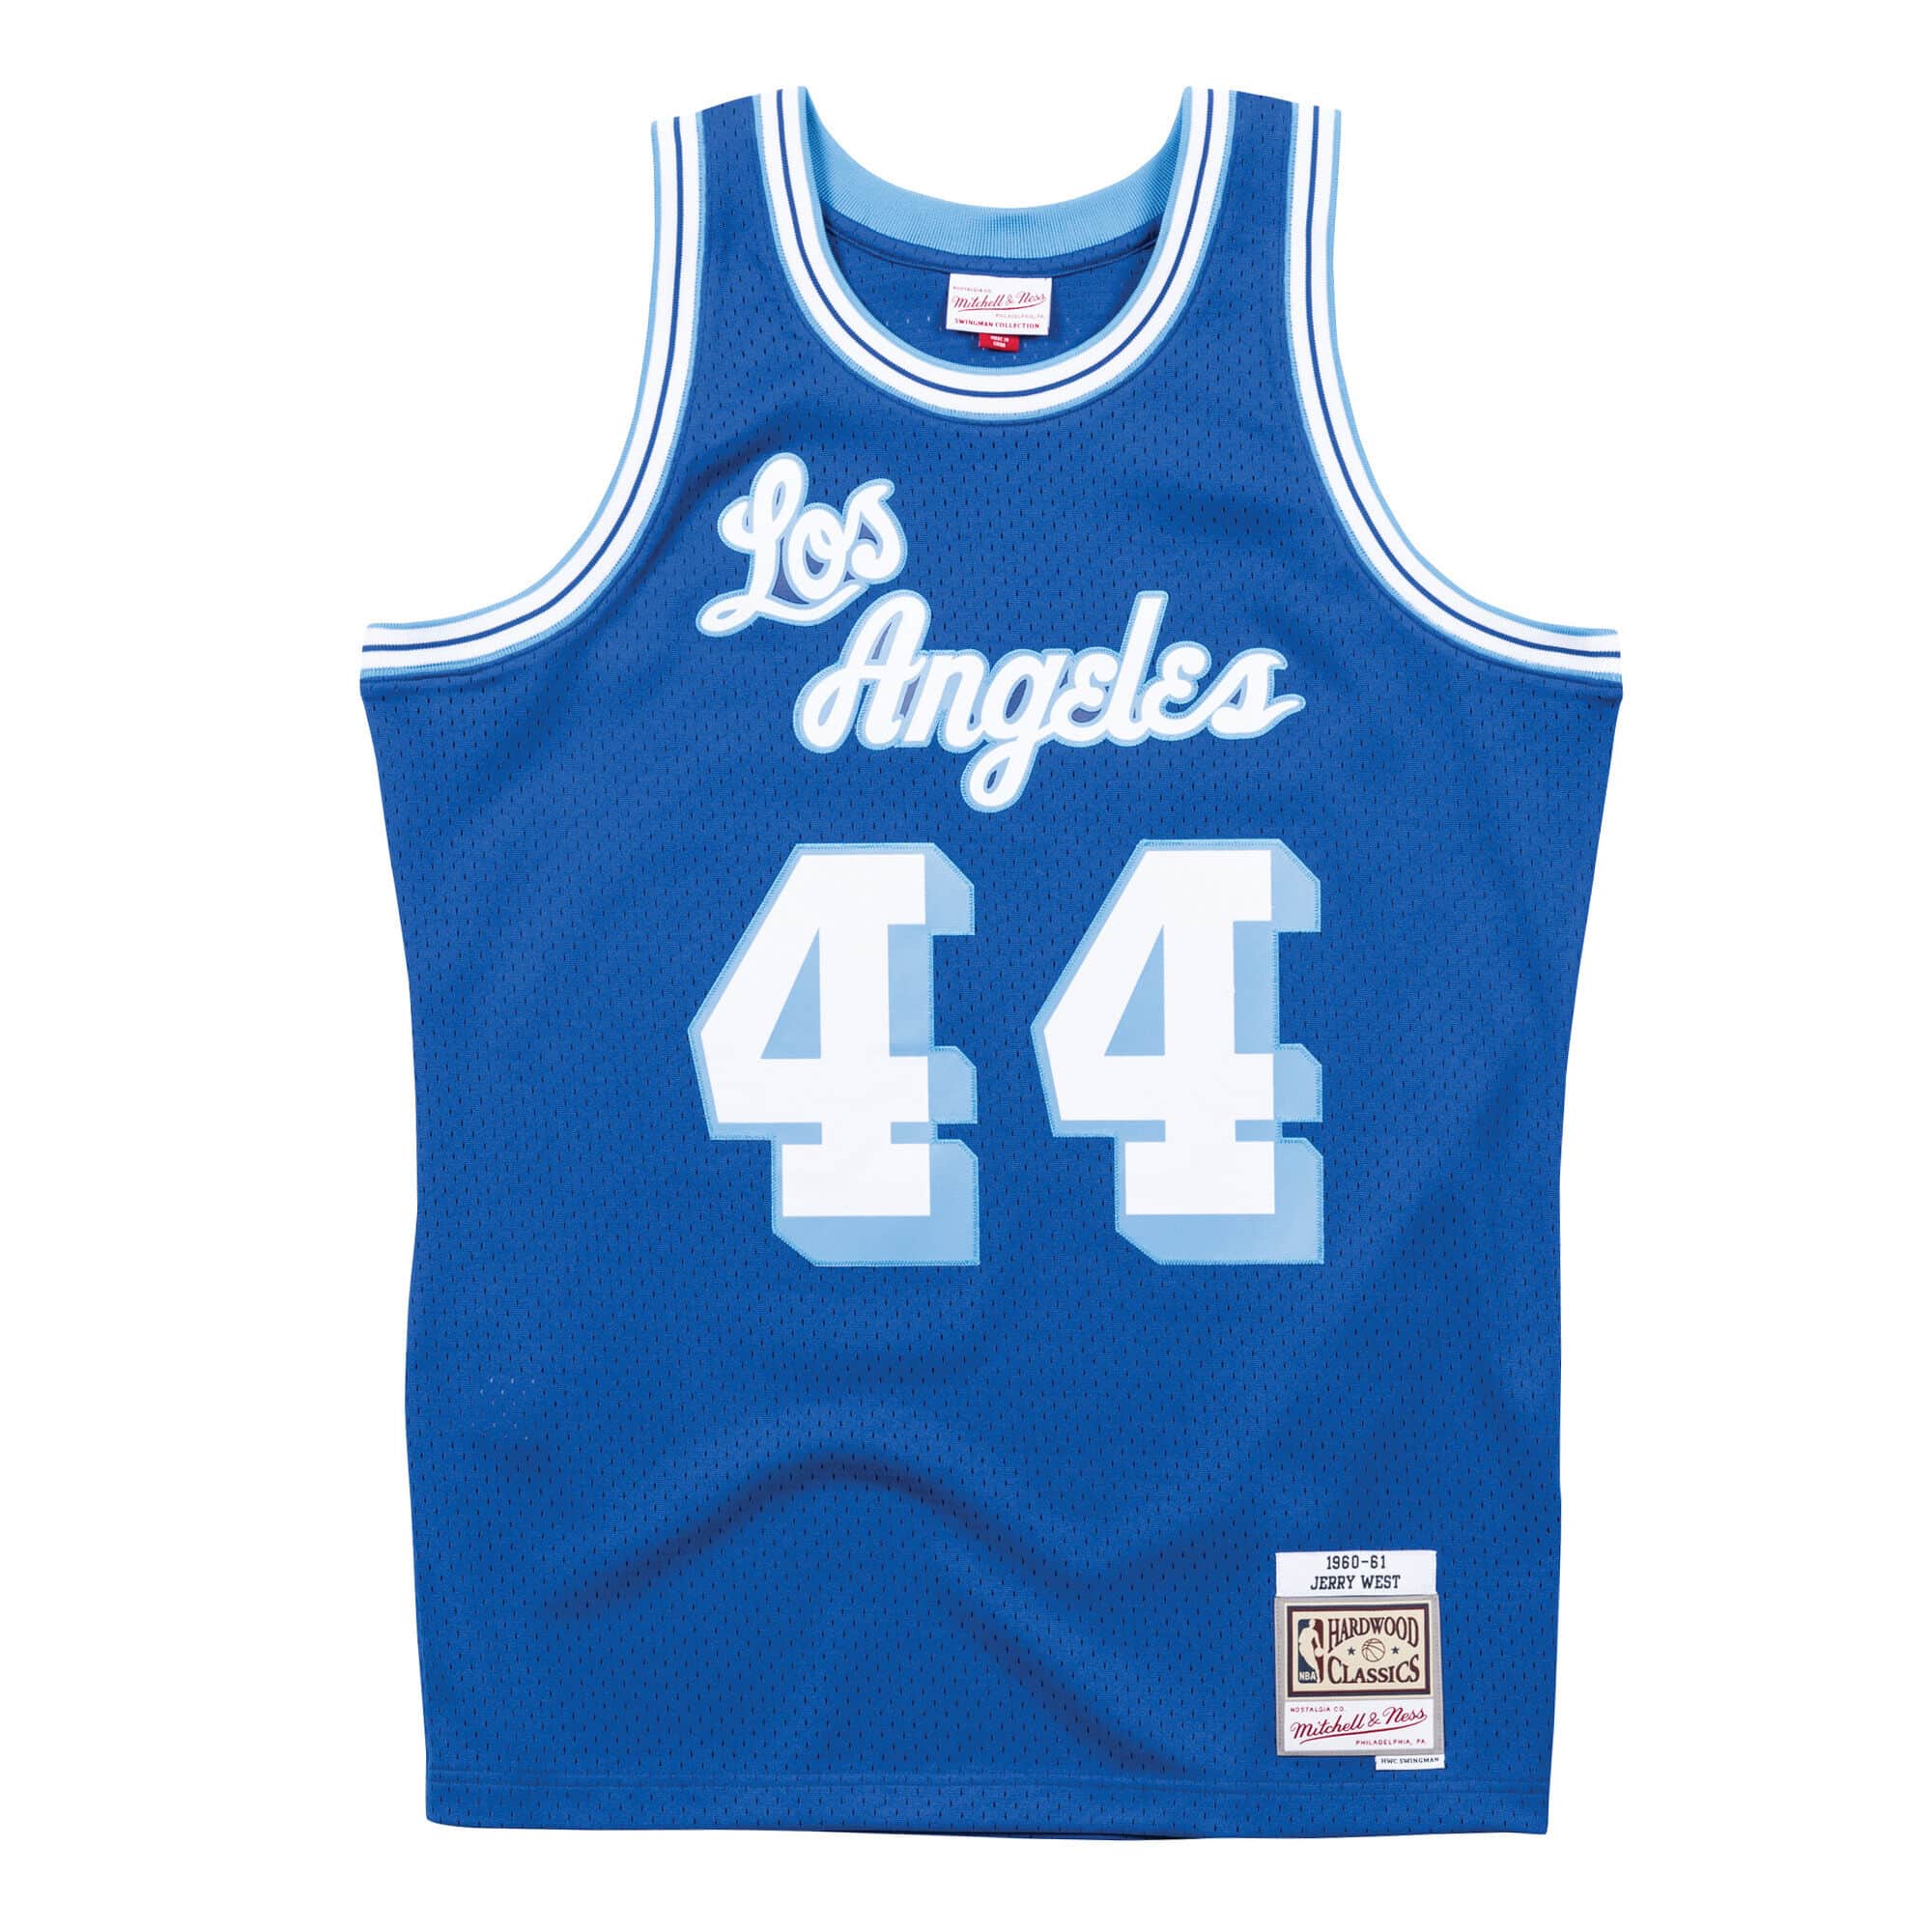 Blue Los Angeles Lakers NBA Jerseys for sale